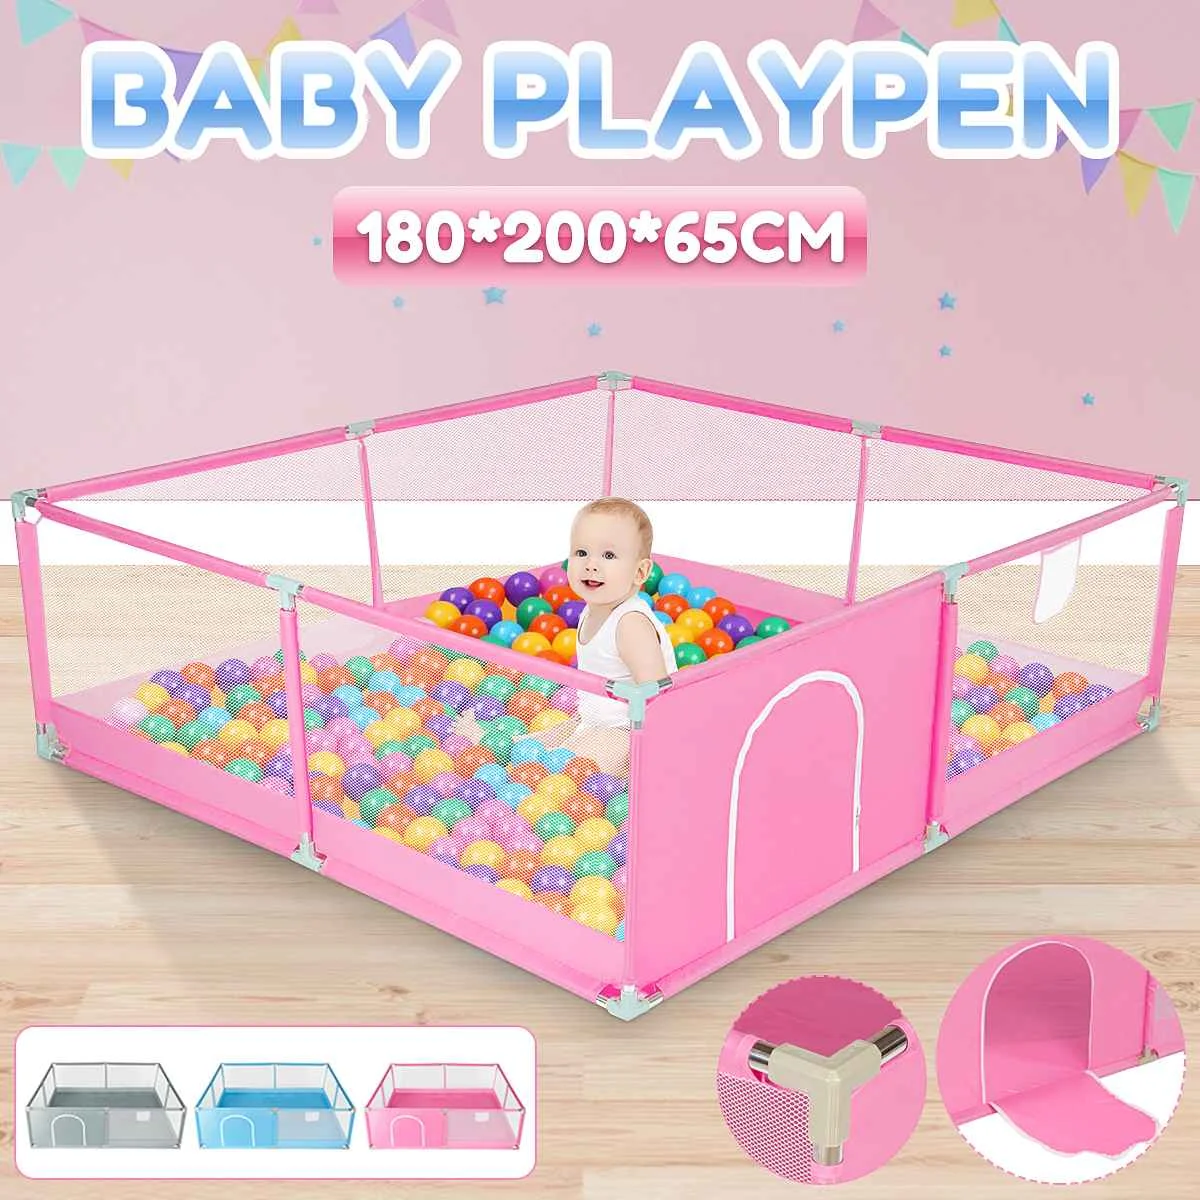 1.8x2m Kids Furniture Baby Playpen For Children Large Dry Pool Baby Playpen Safety Indoor Barriers Home Playground Park Fences